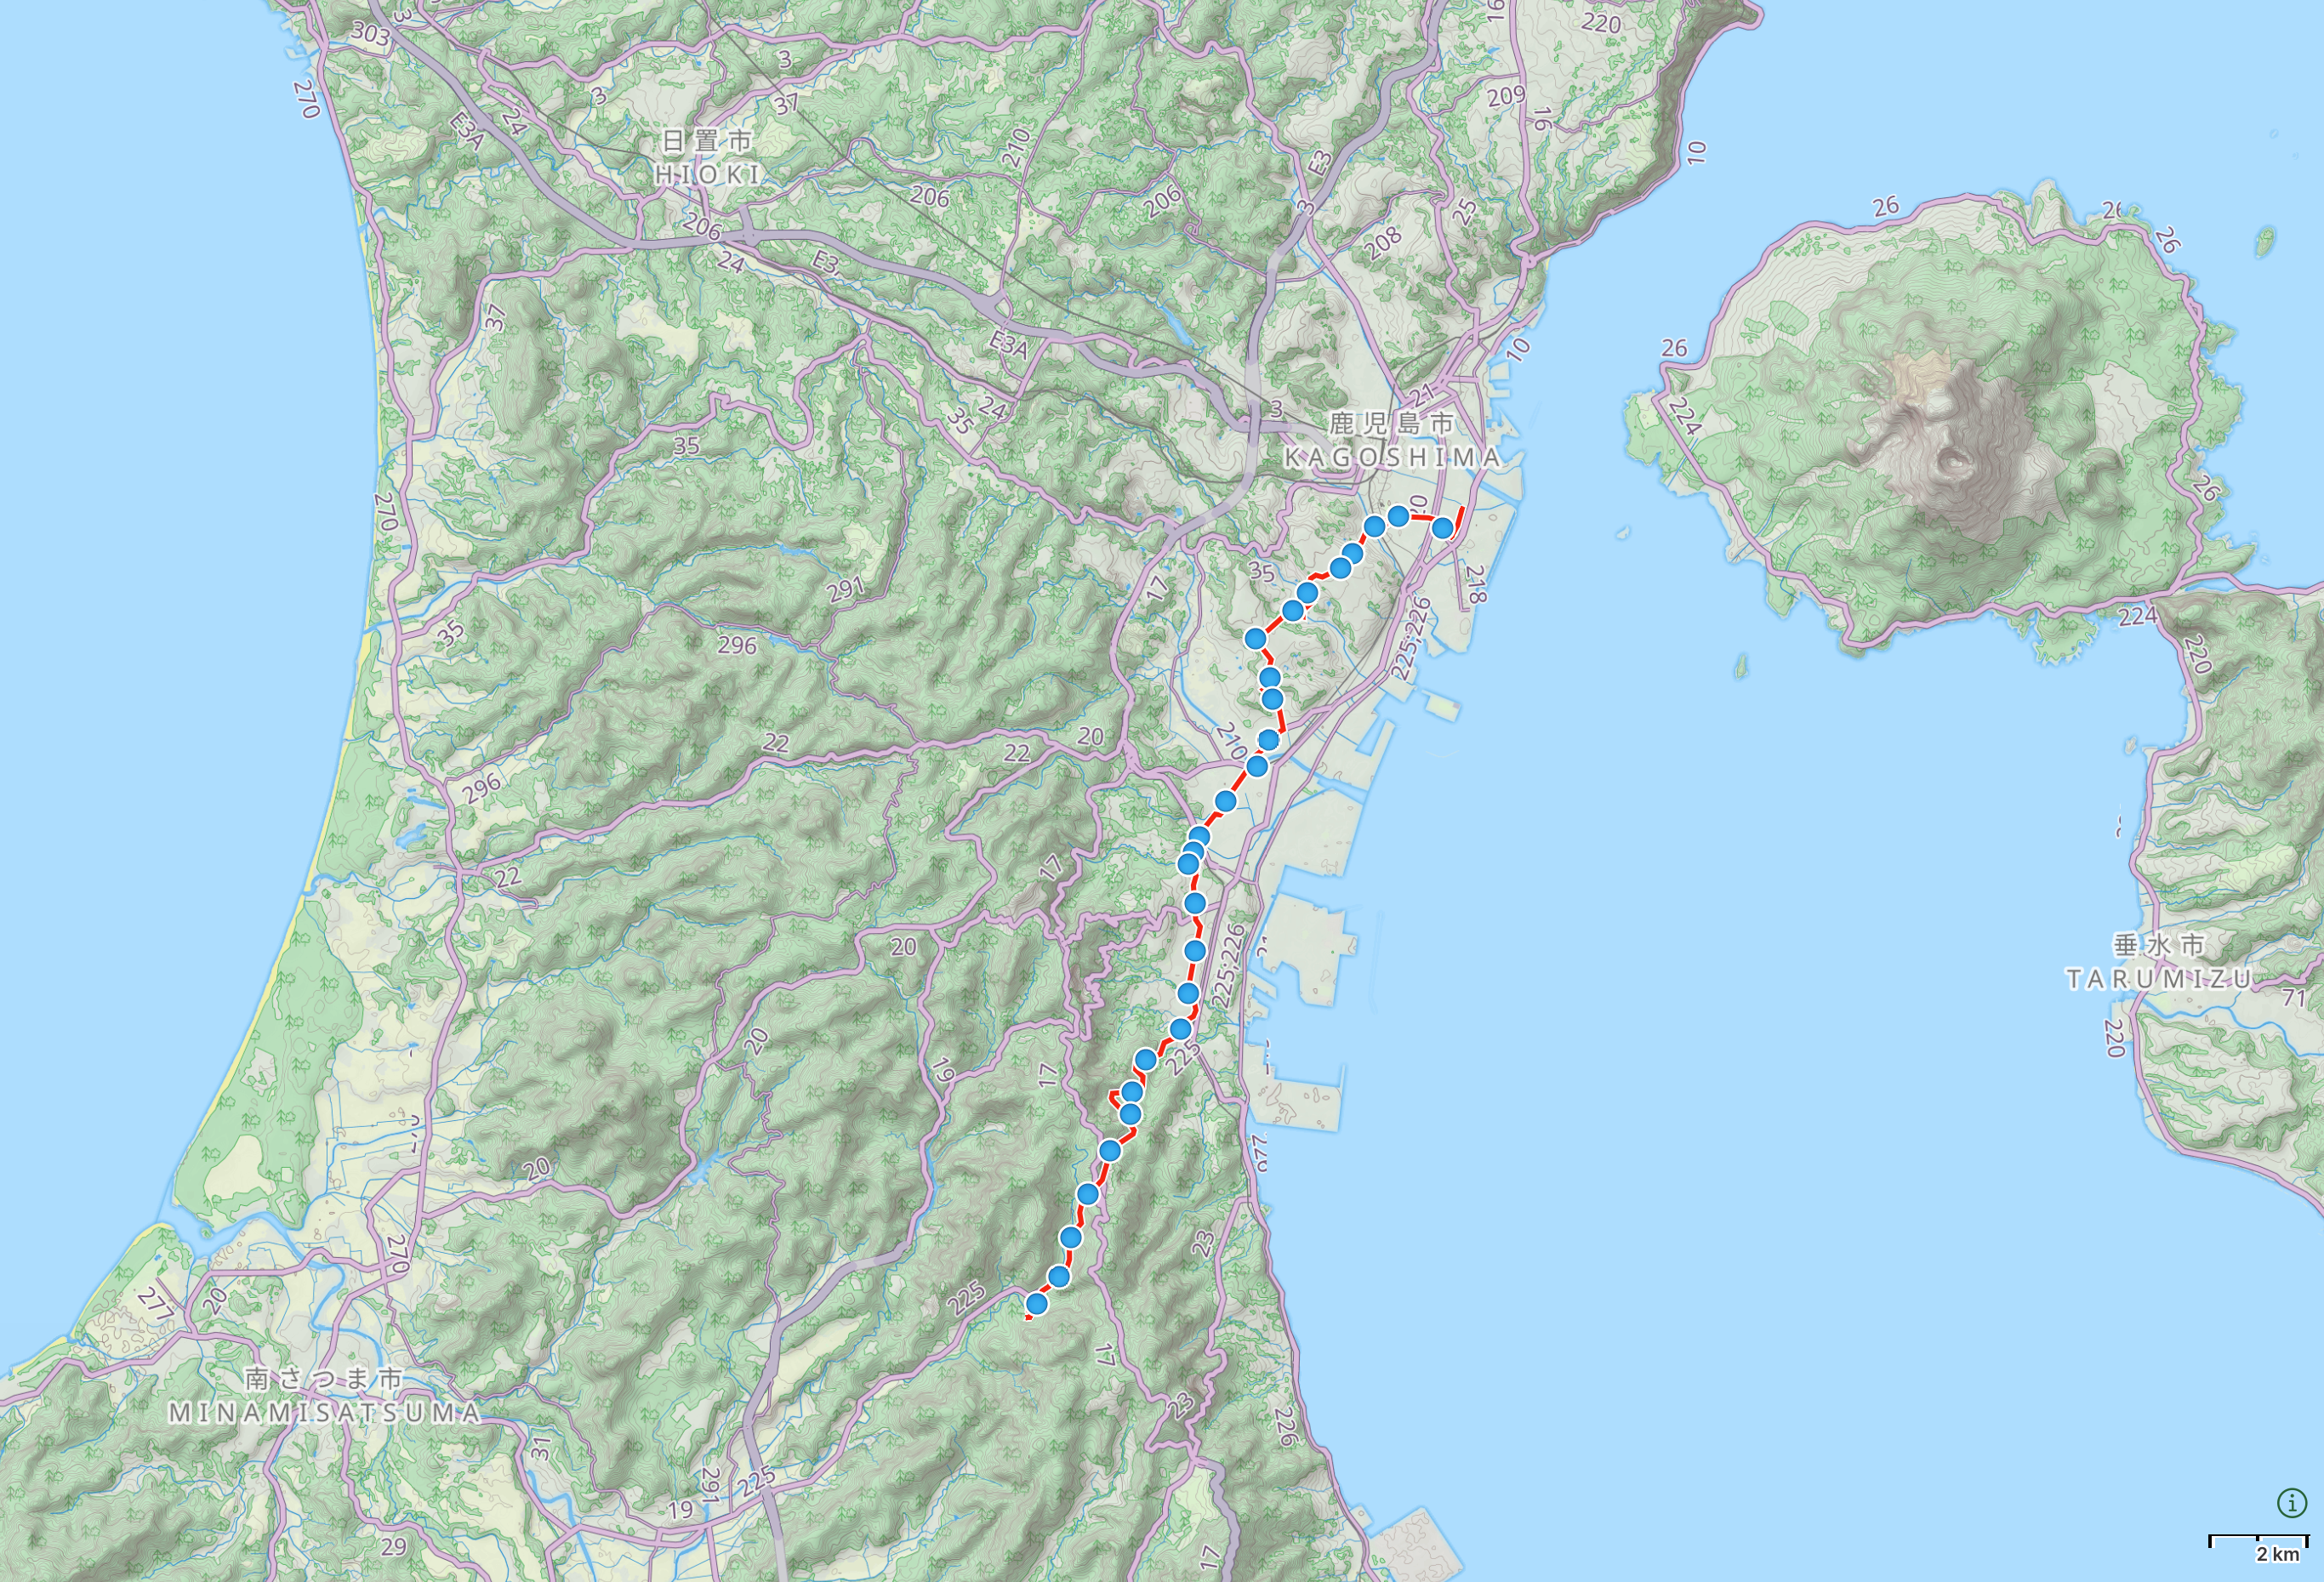 Map of Kagoshima Prefecture with author’s route between Kagoshima City and Kawanabe highlighted.